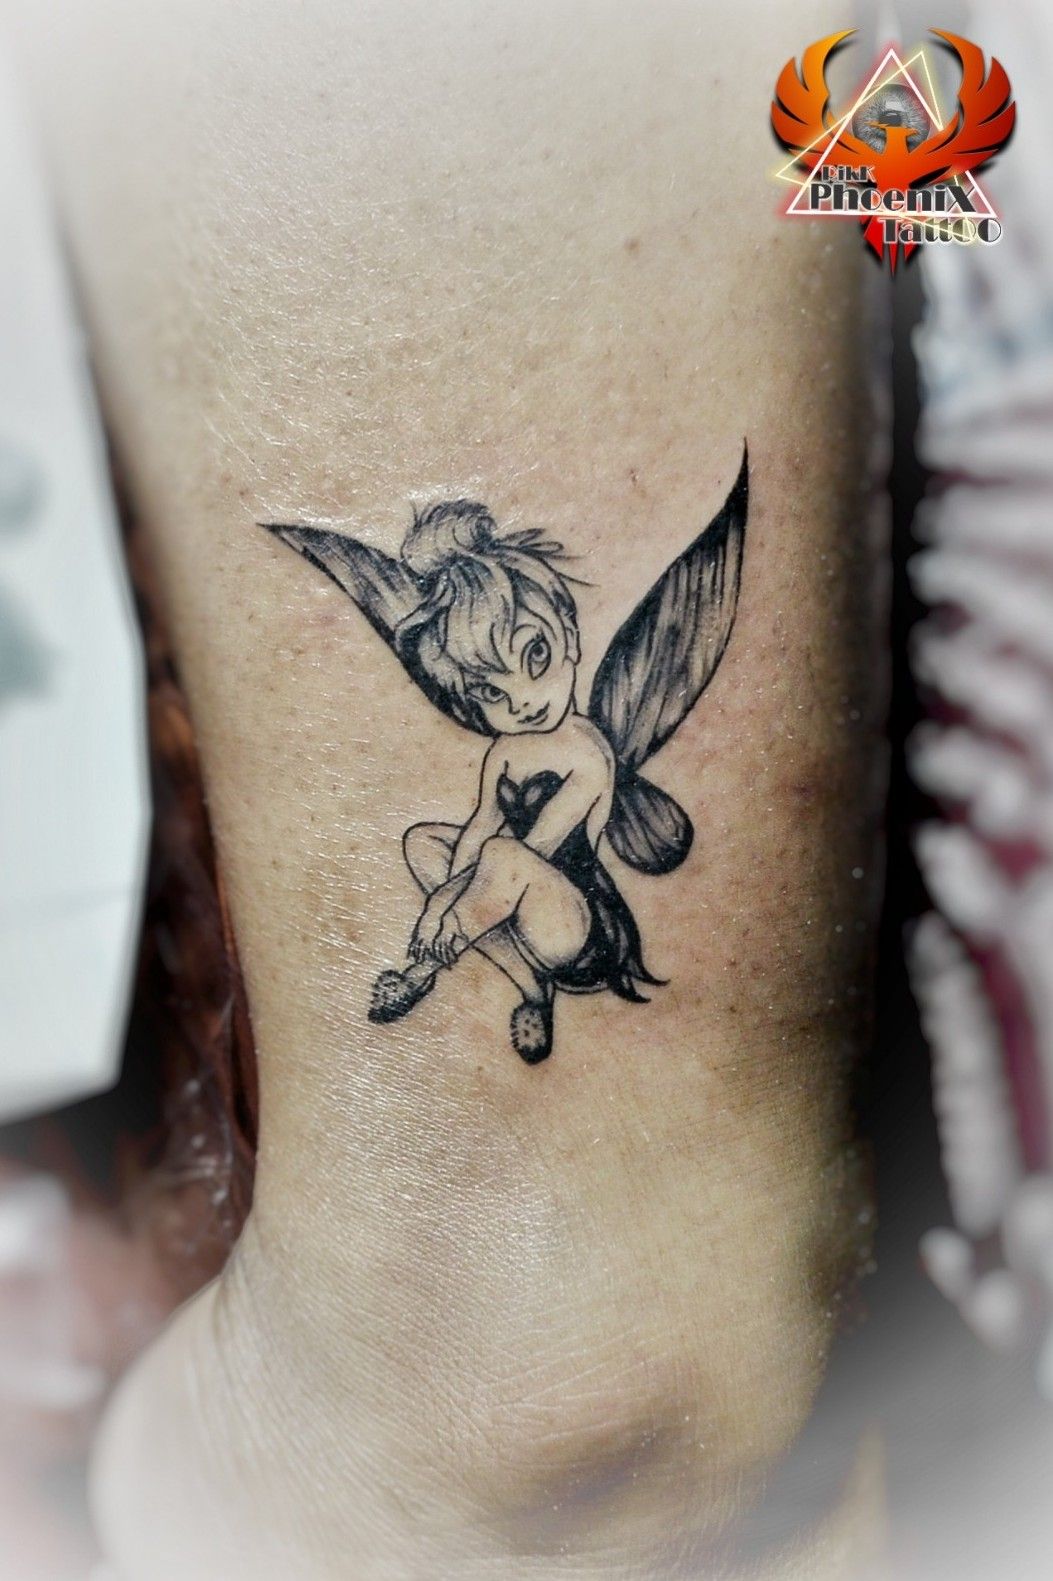 28 Hottest Tinker Bell Tattoo Ideas and Designs | Tinker bell tattoo, Belle  tattoo, Small pretty tattoos